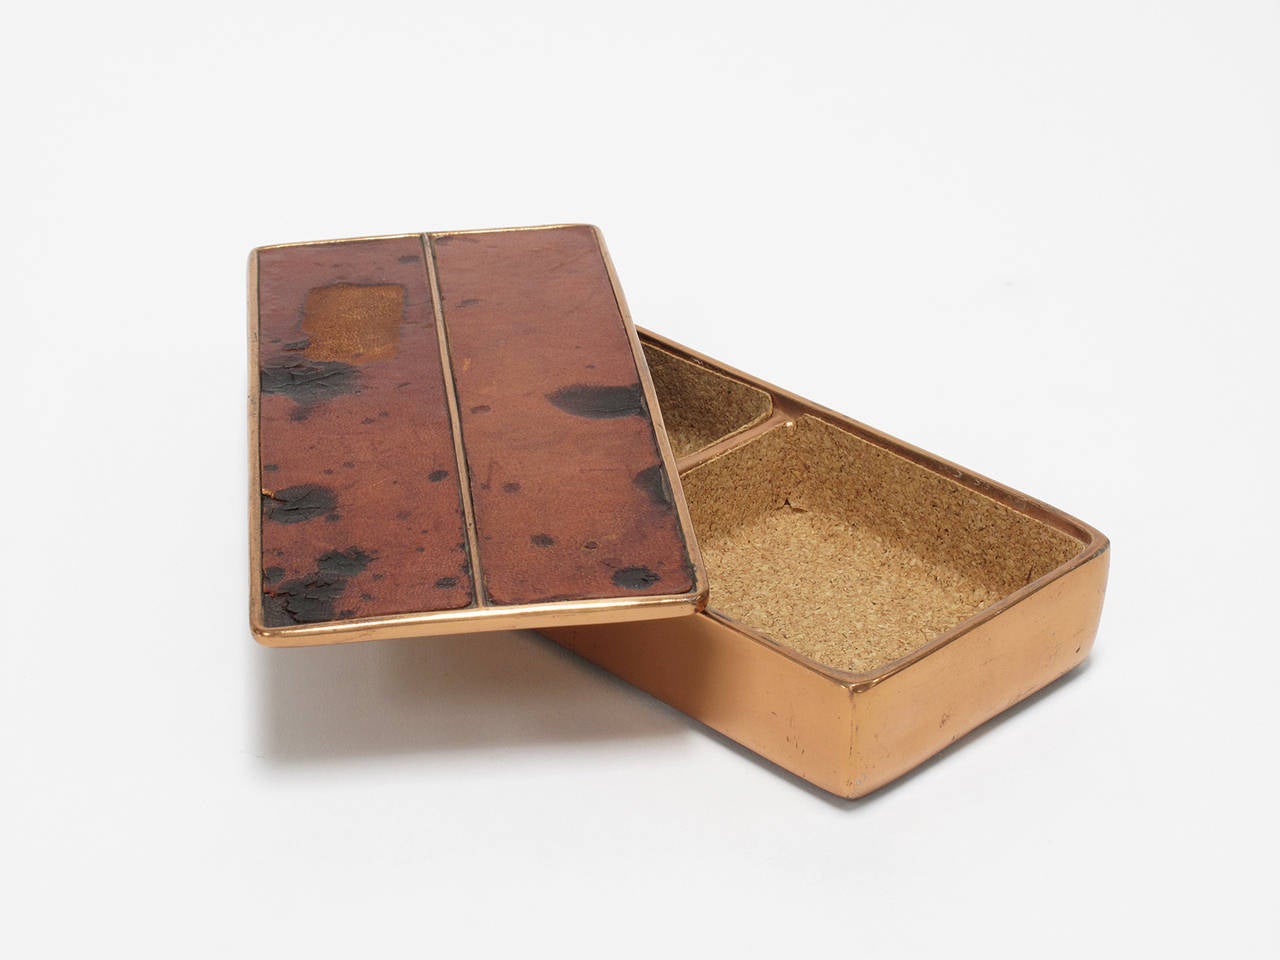 Copper-plated, cork lined metal box with two storage compartments, copper lid with inlaid leather. Handsome keepsake container for trinkets, jewelry and coveted objects. Designed by Ben Seibel and made by Jenfred Ware, New York, 1950s.